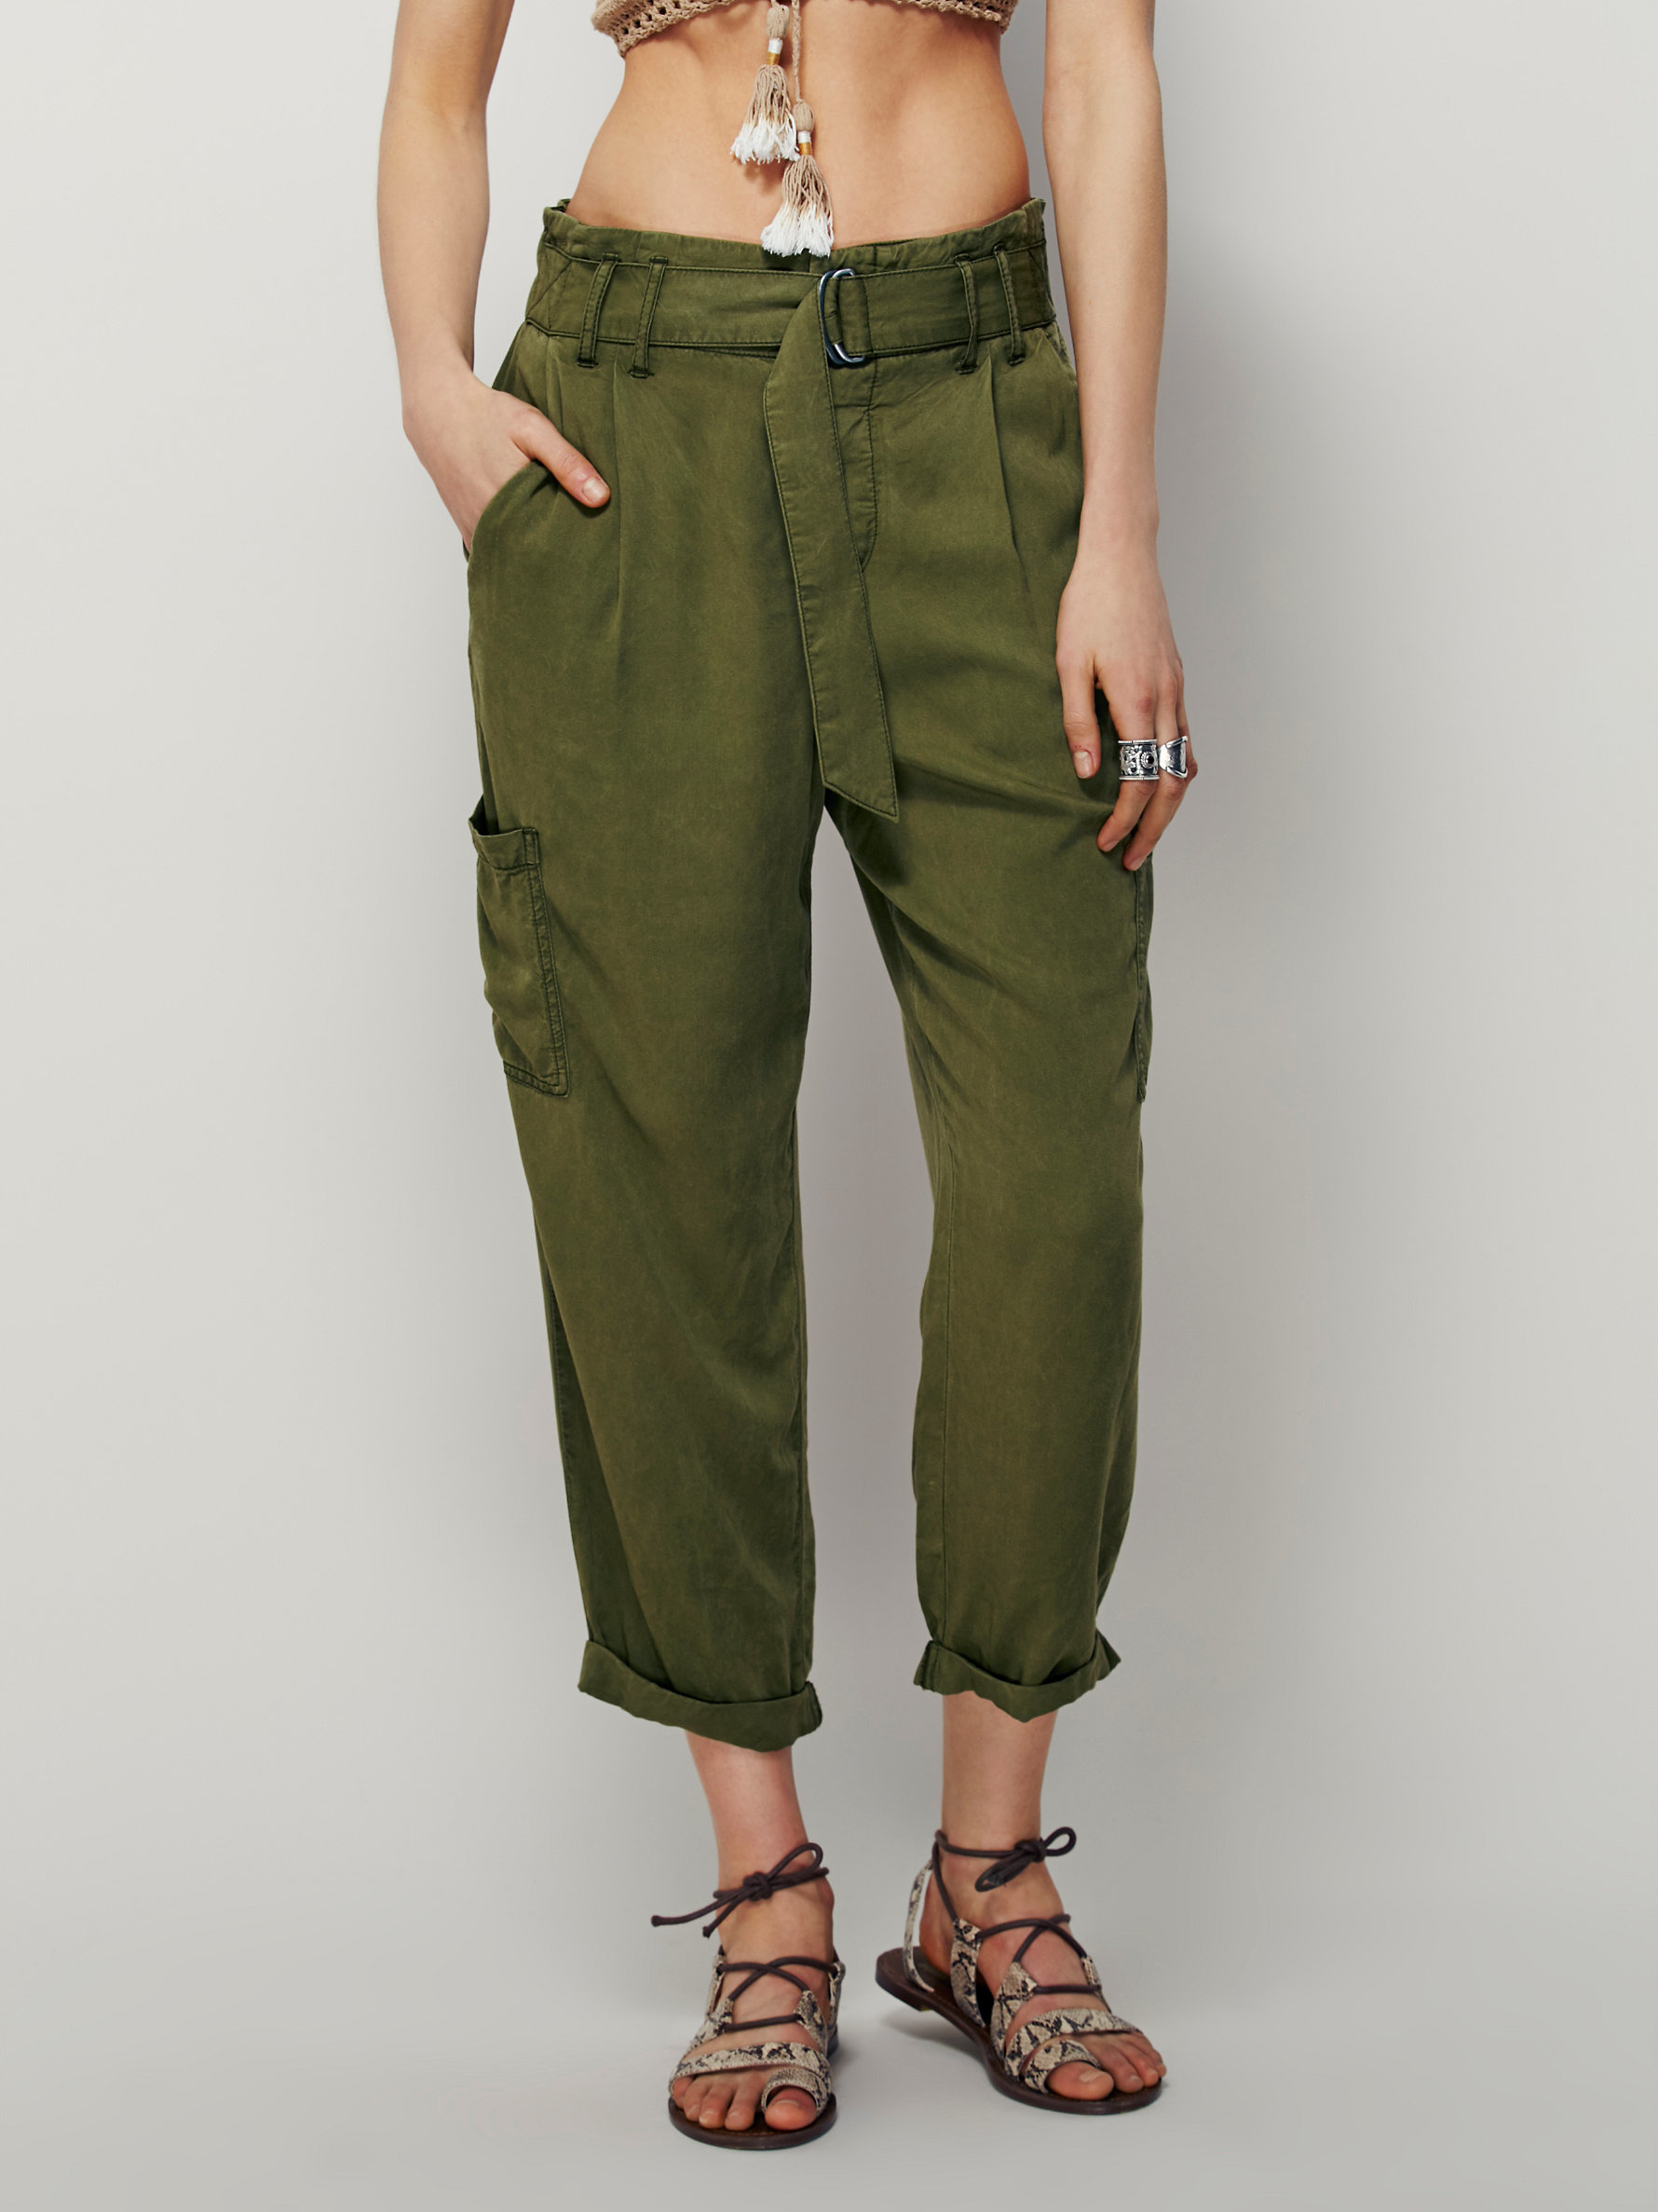 Free People Summer's Over Cargo Pants in Green